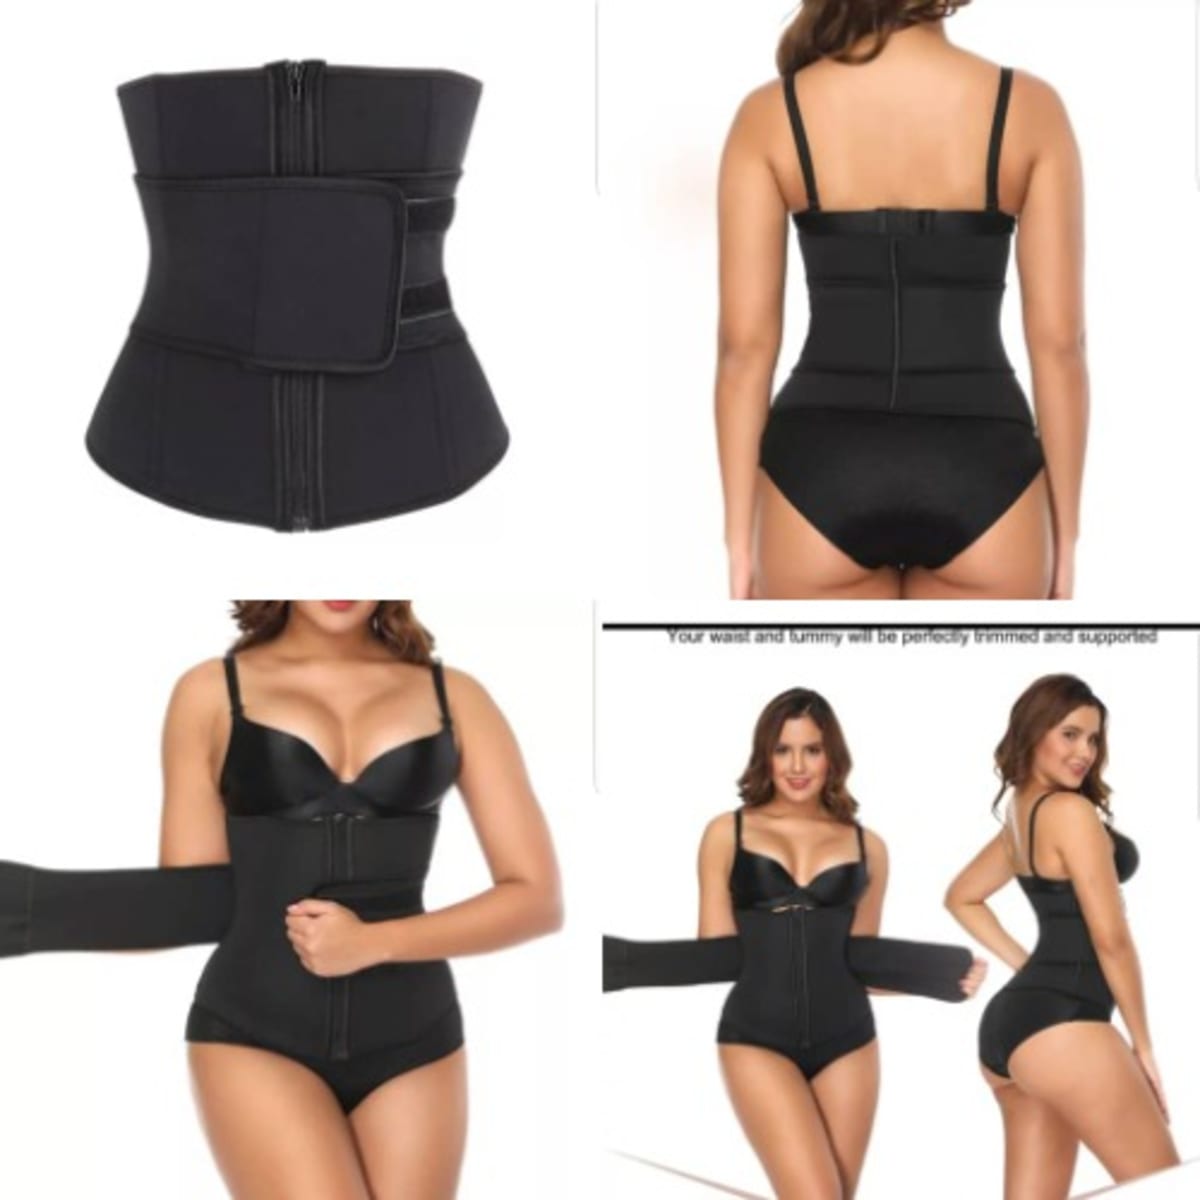 Compression Belly And Waist Trainer - Clincher Belt